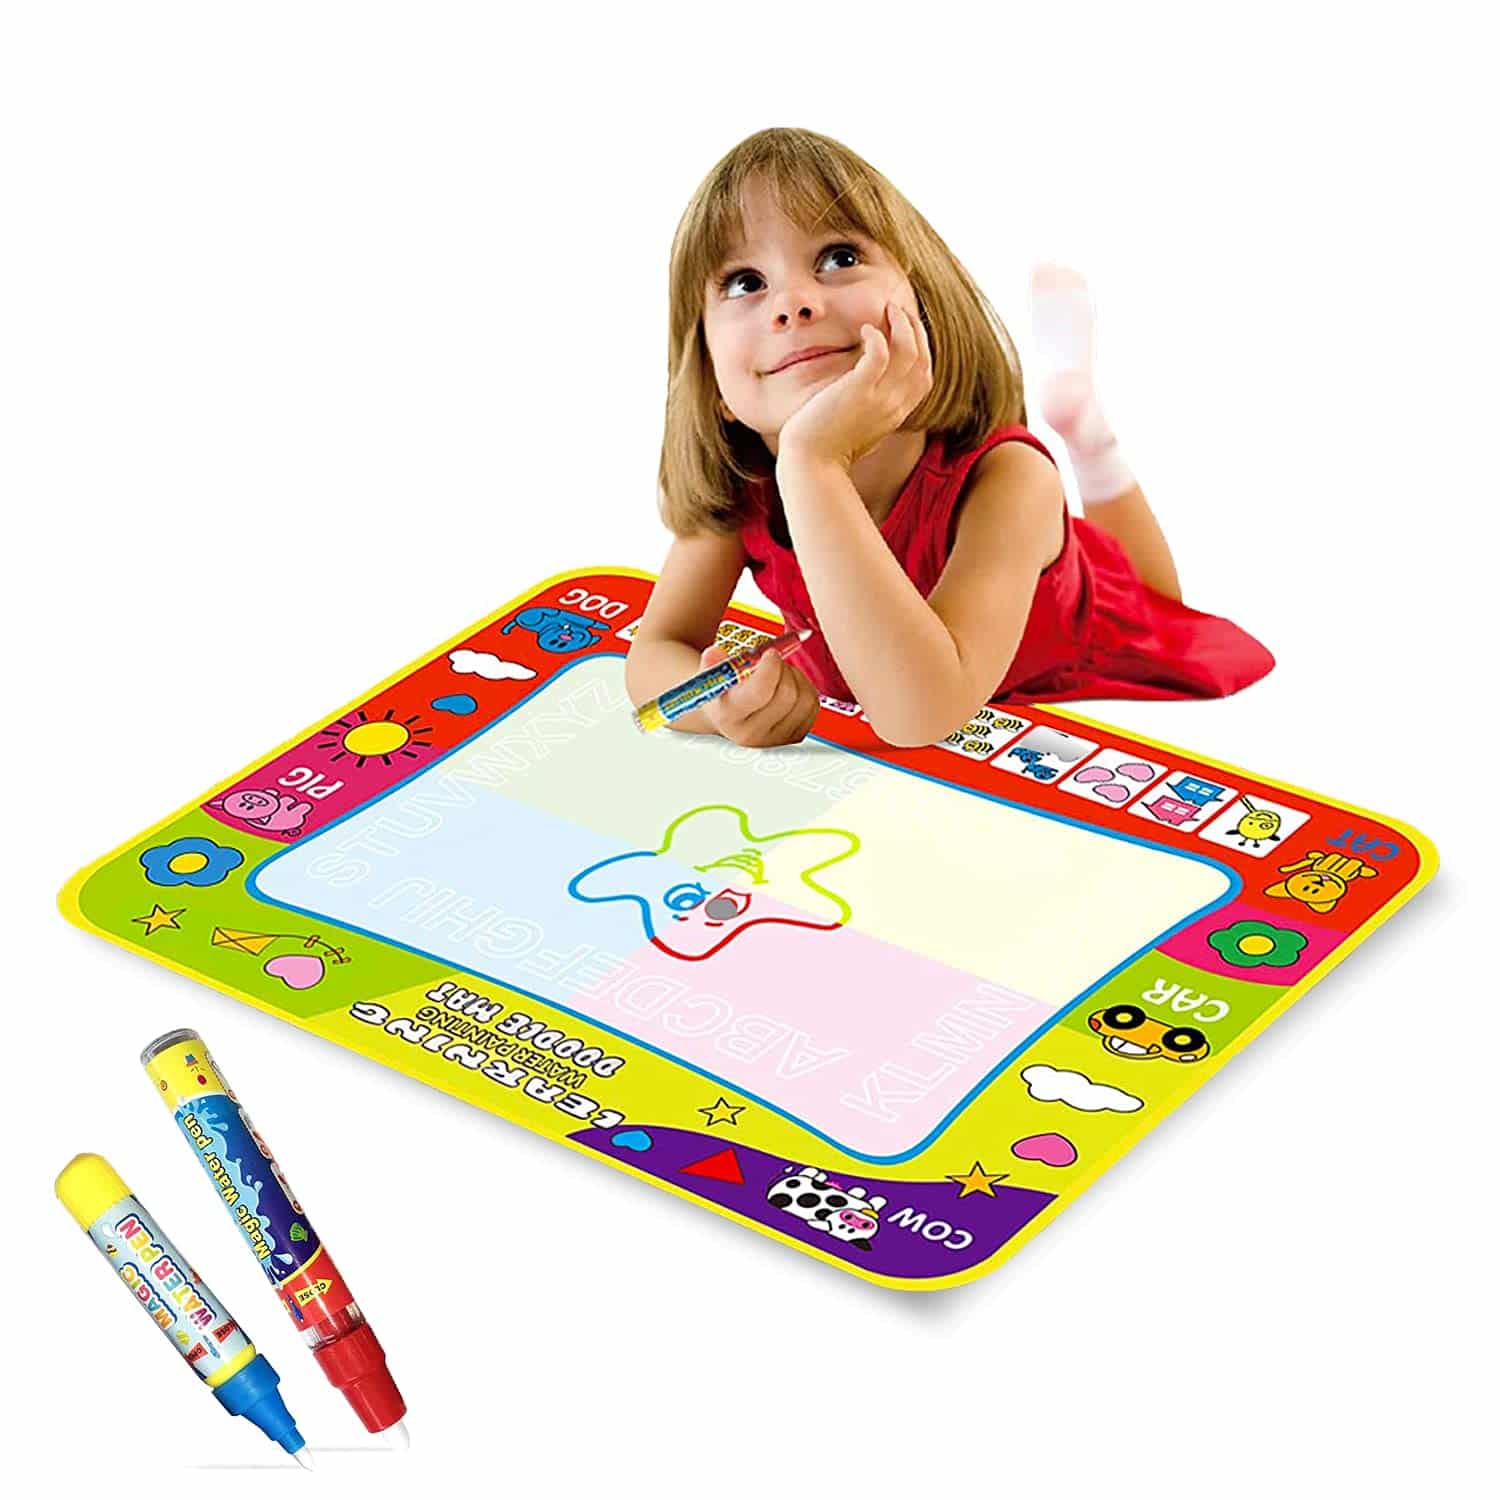 Magic Water Drawing Mat with Rainbow Color Swatches,Children Magic Water Drawing Mat Board,Educational Toy Gift for Kids